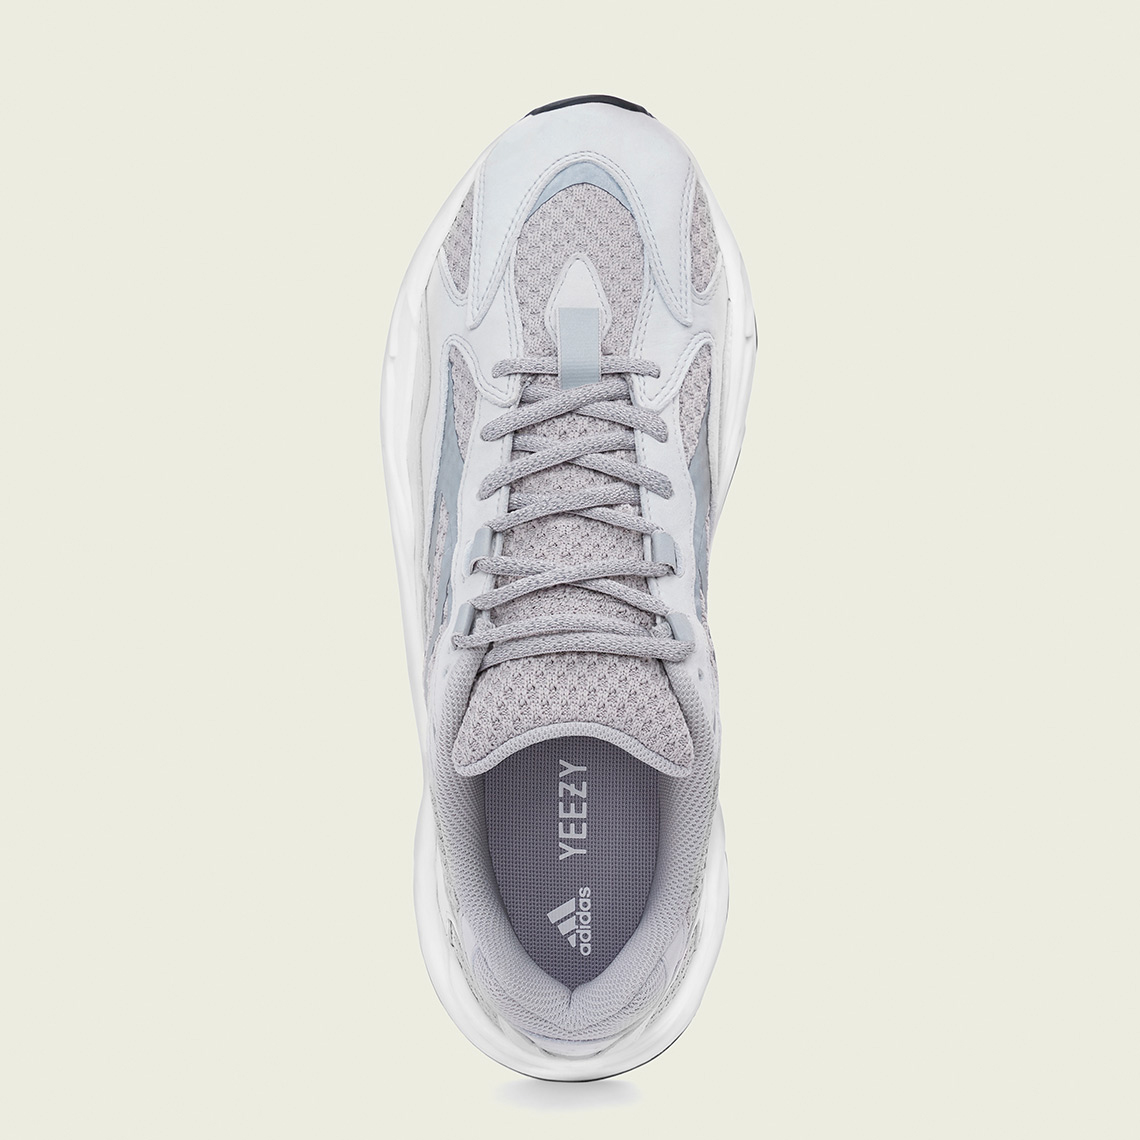 adidas-Yeezy-Boost-700-V2-Static-2023-Restock-Release-Date-4